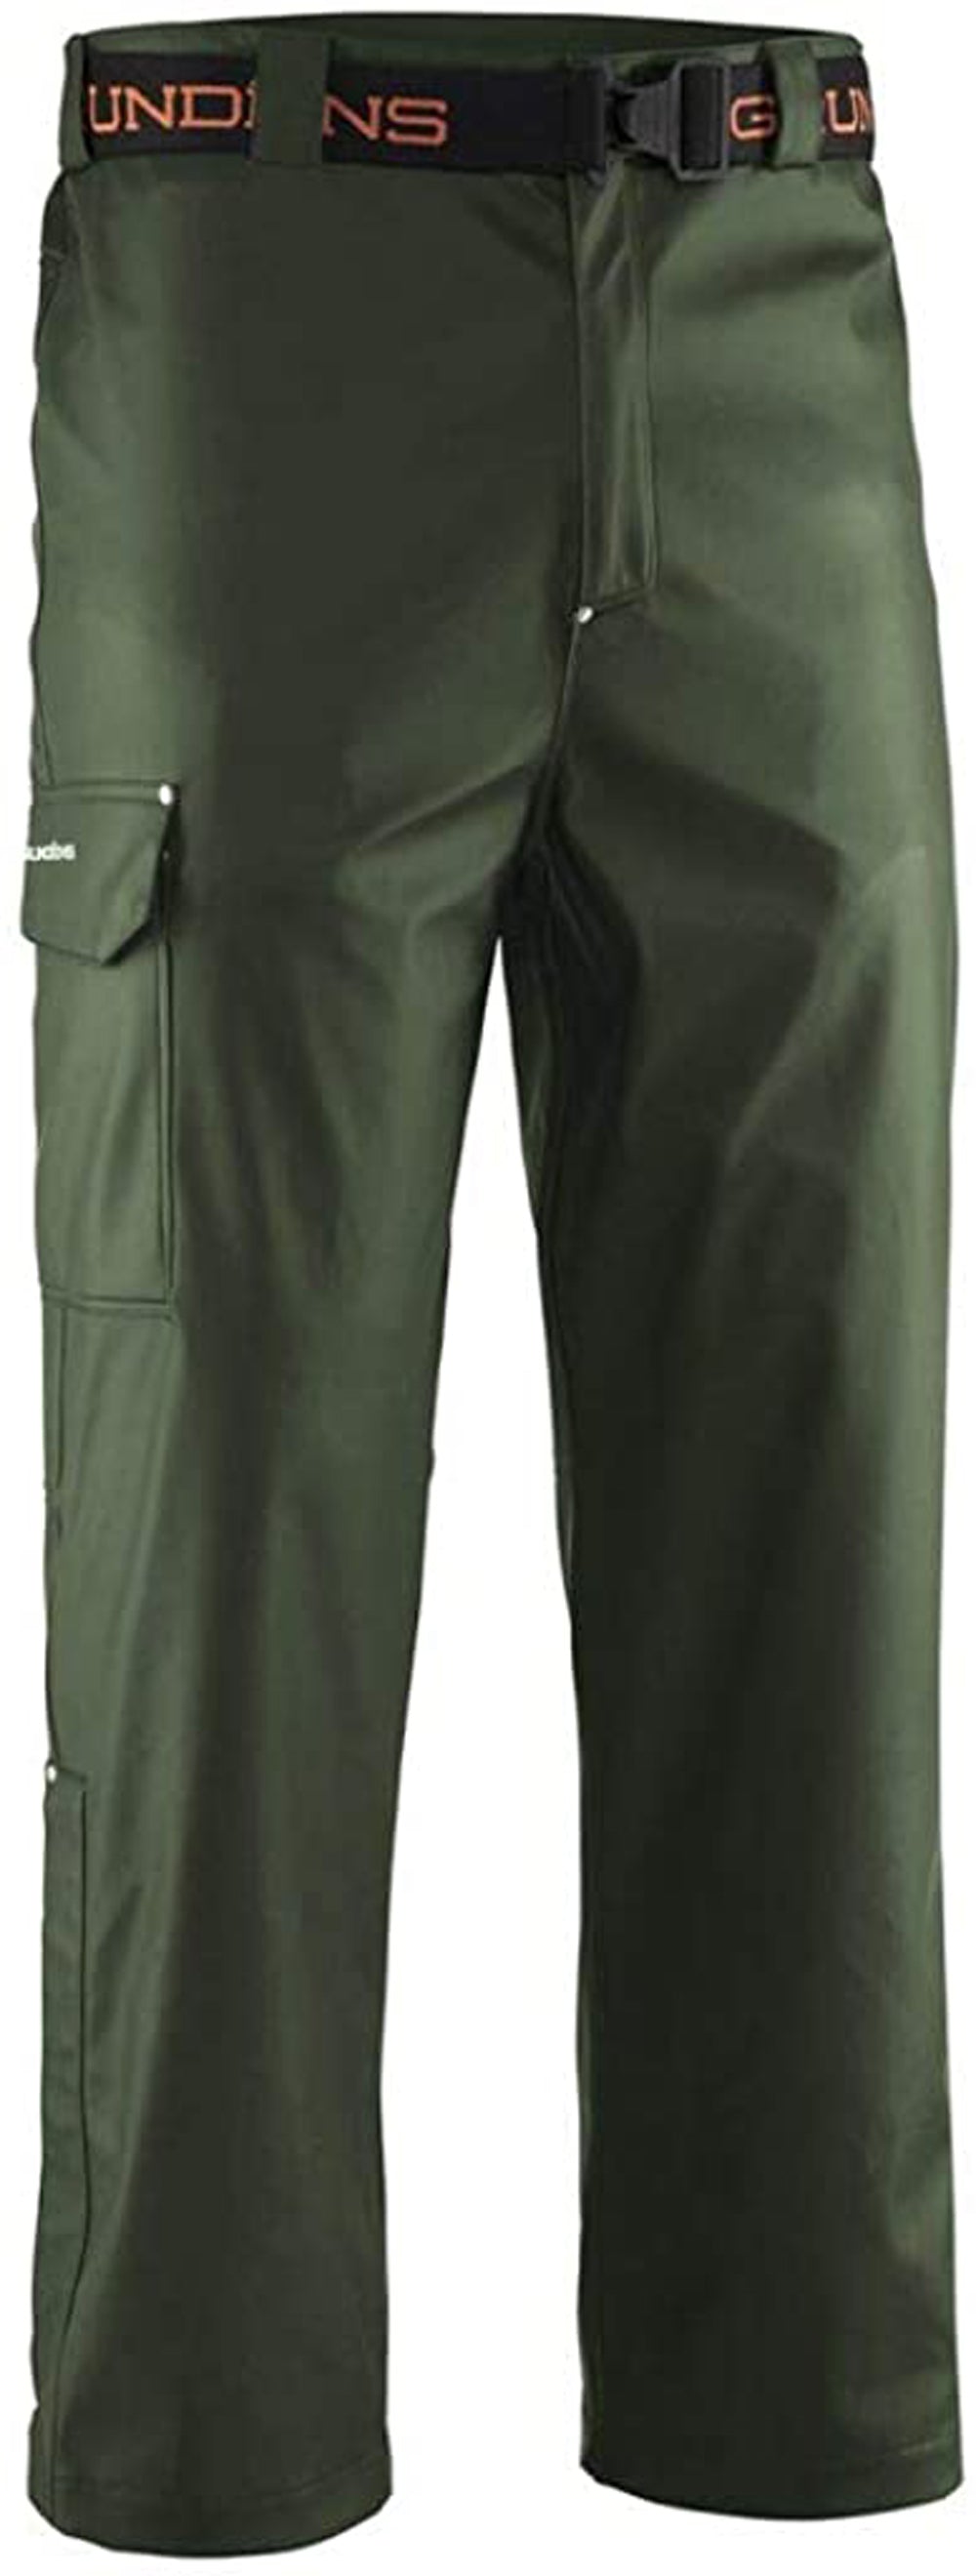 Neptune Pant in Green color from the front view